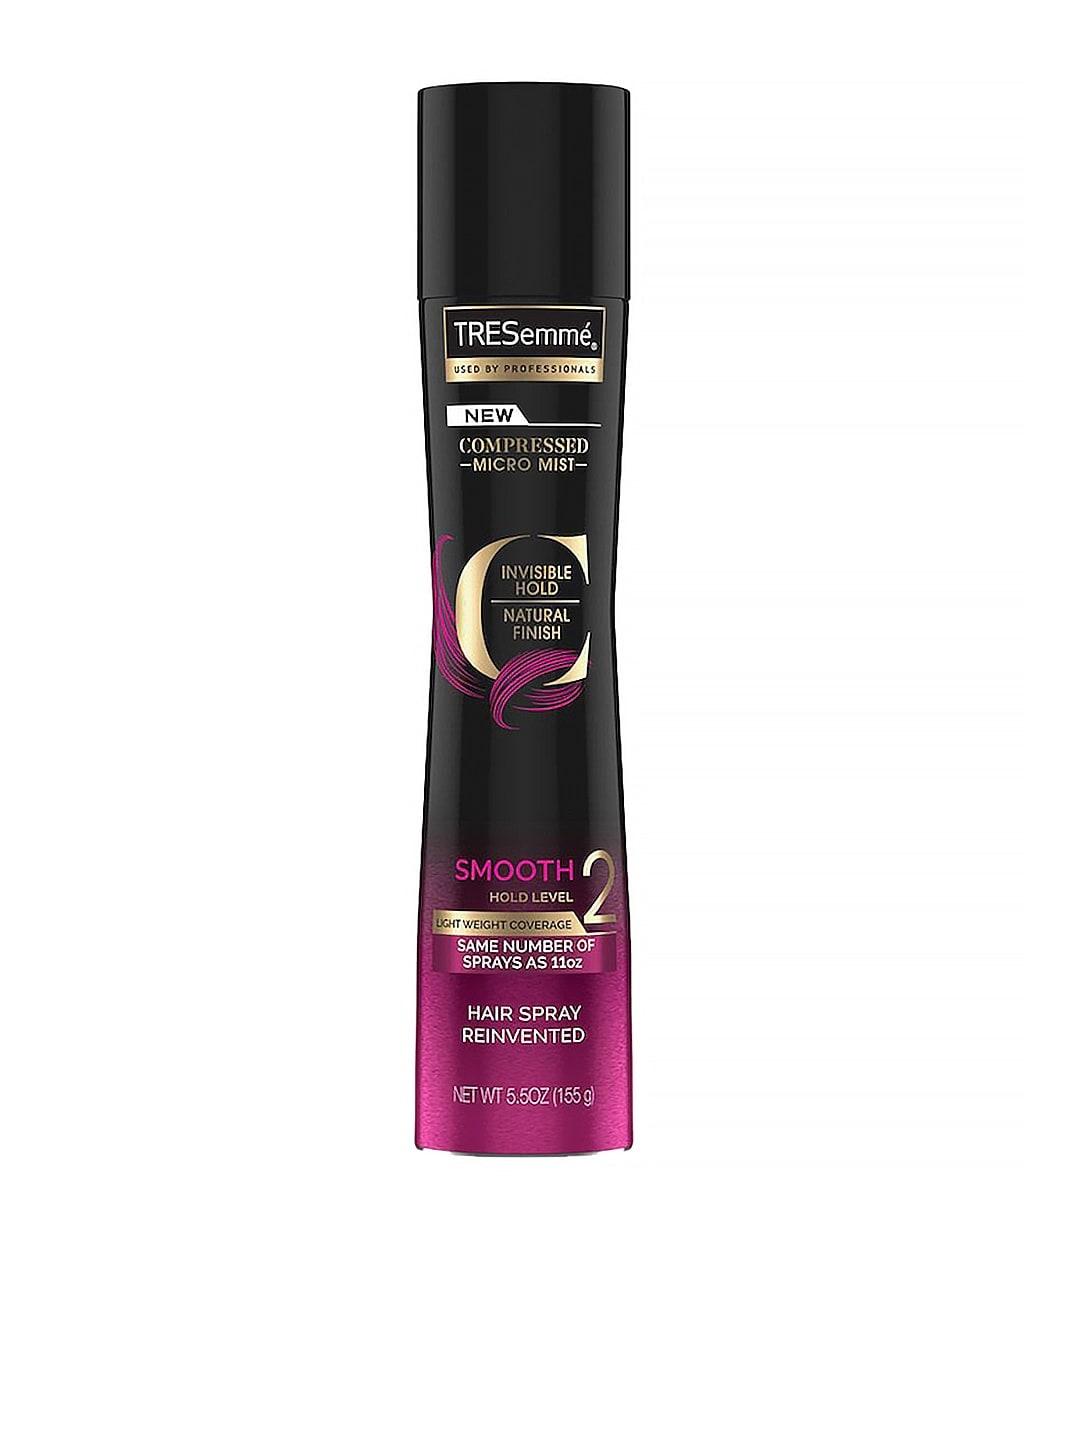 TRESemme Compressed Micro Mist Level 2 Invisible Hold Natural Finish Hair Spray 155 g